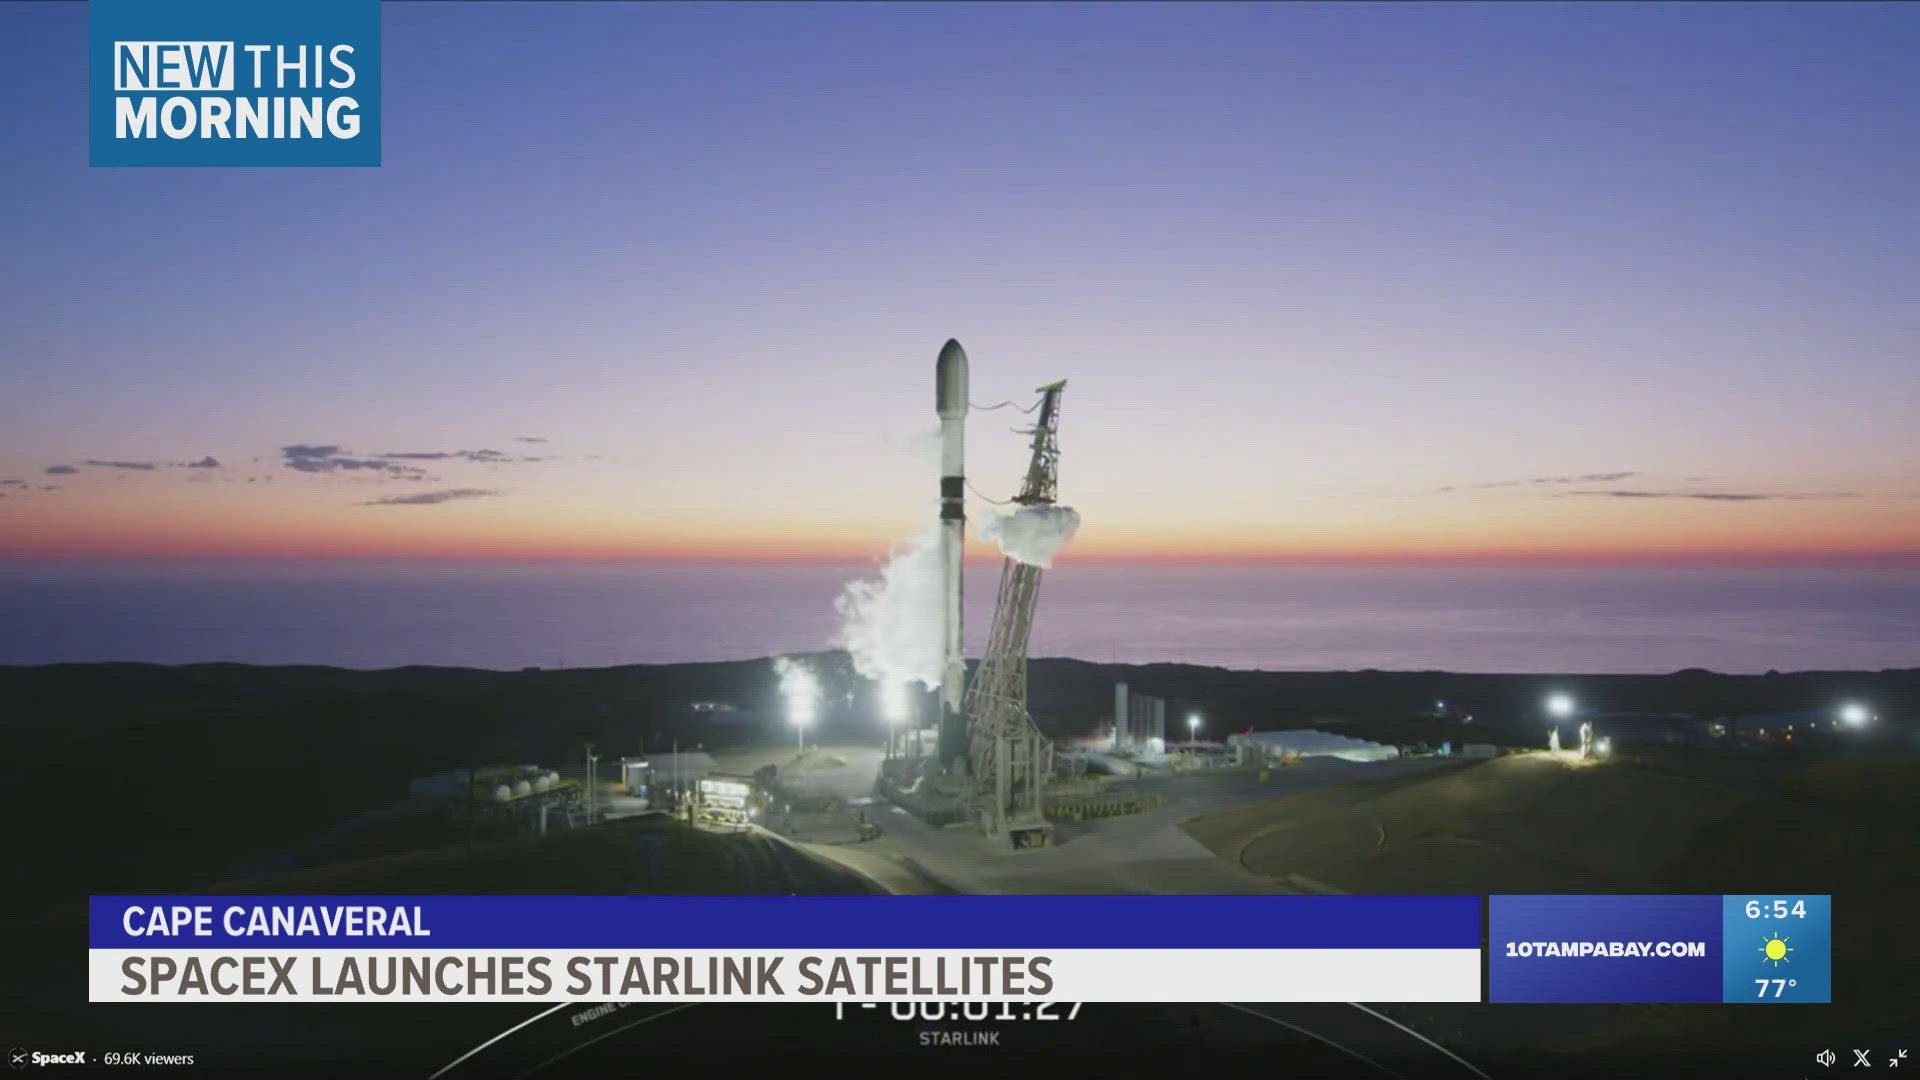 The Falcon 9 blasted off Sunday night from Cape Canaveral and the satellites are meant to further connect and provide WiFi for areas across the globe.